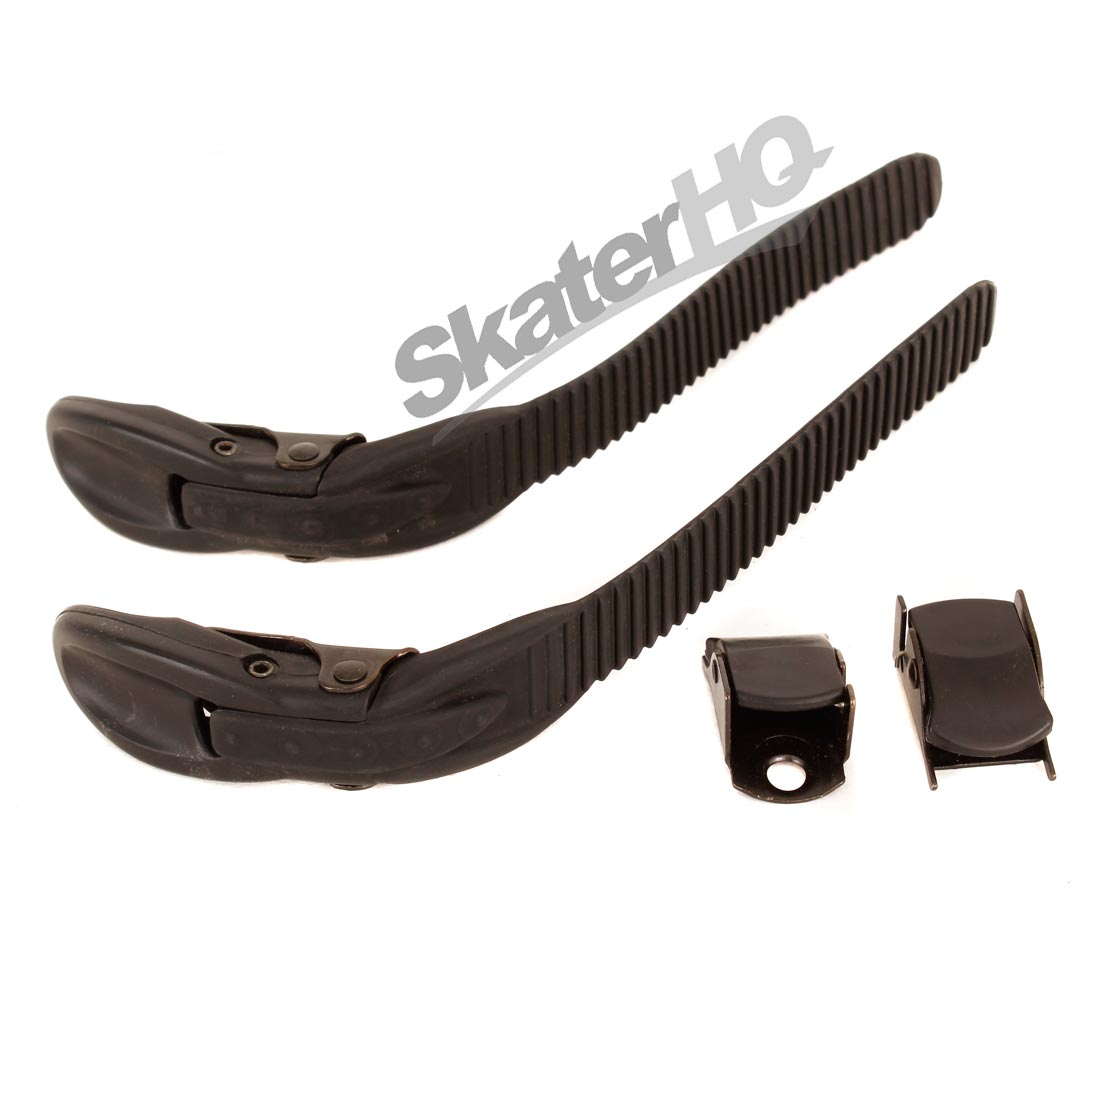 K2 Skate Replacement Buckle Pair 160mm Kit - Black Inline Hardware and Parts